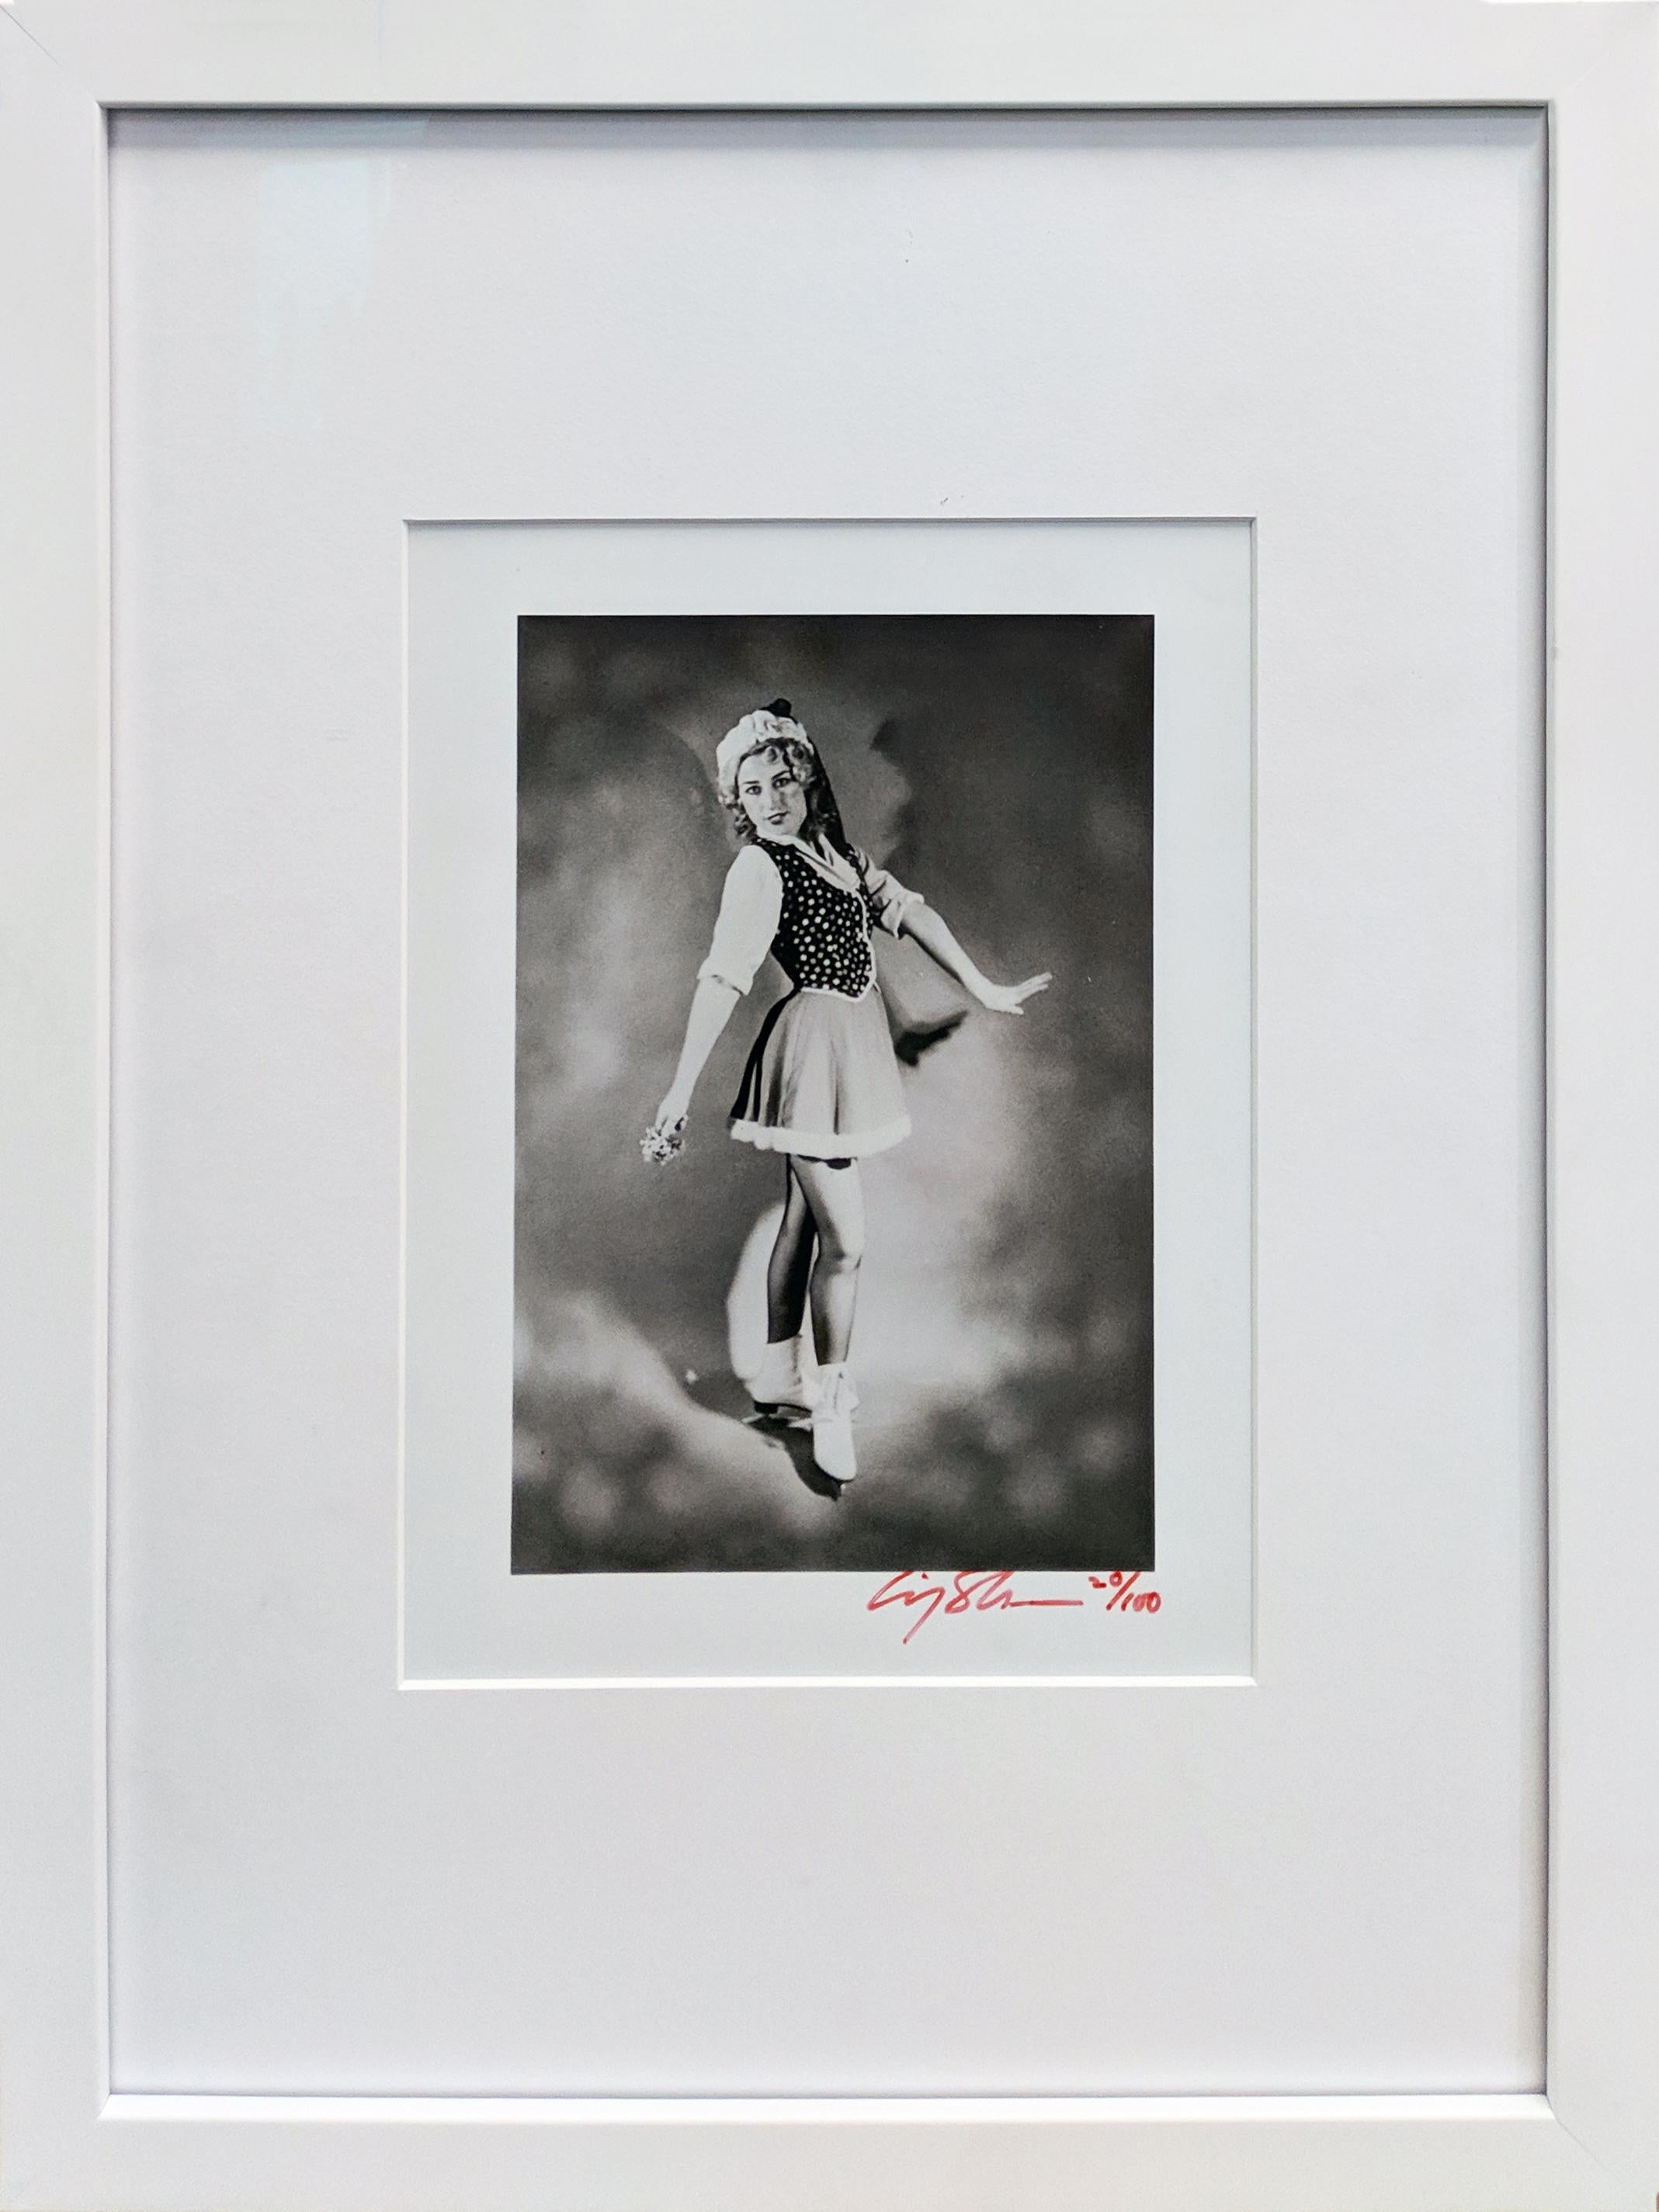 Untitled (Ice Skater) - Photograph by Cindy Sherman